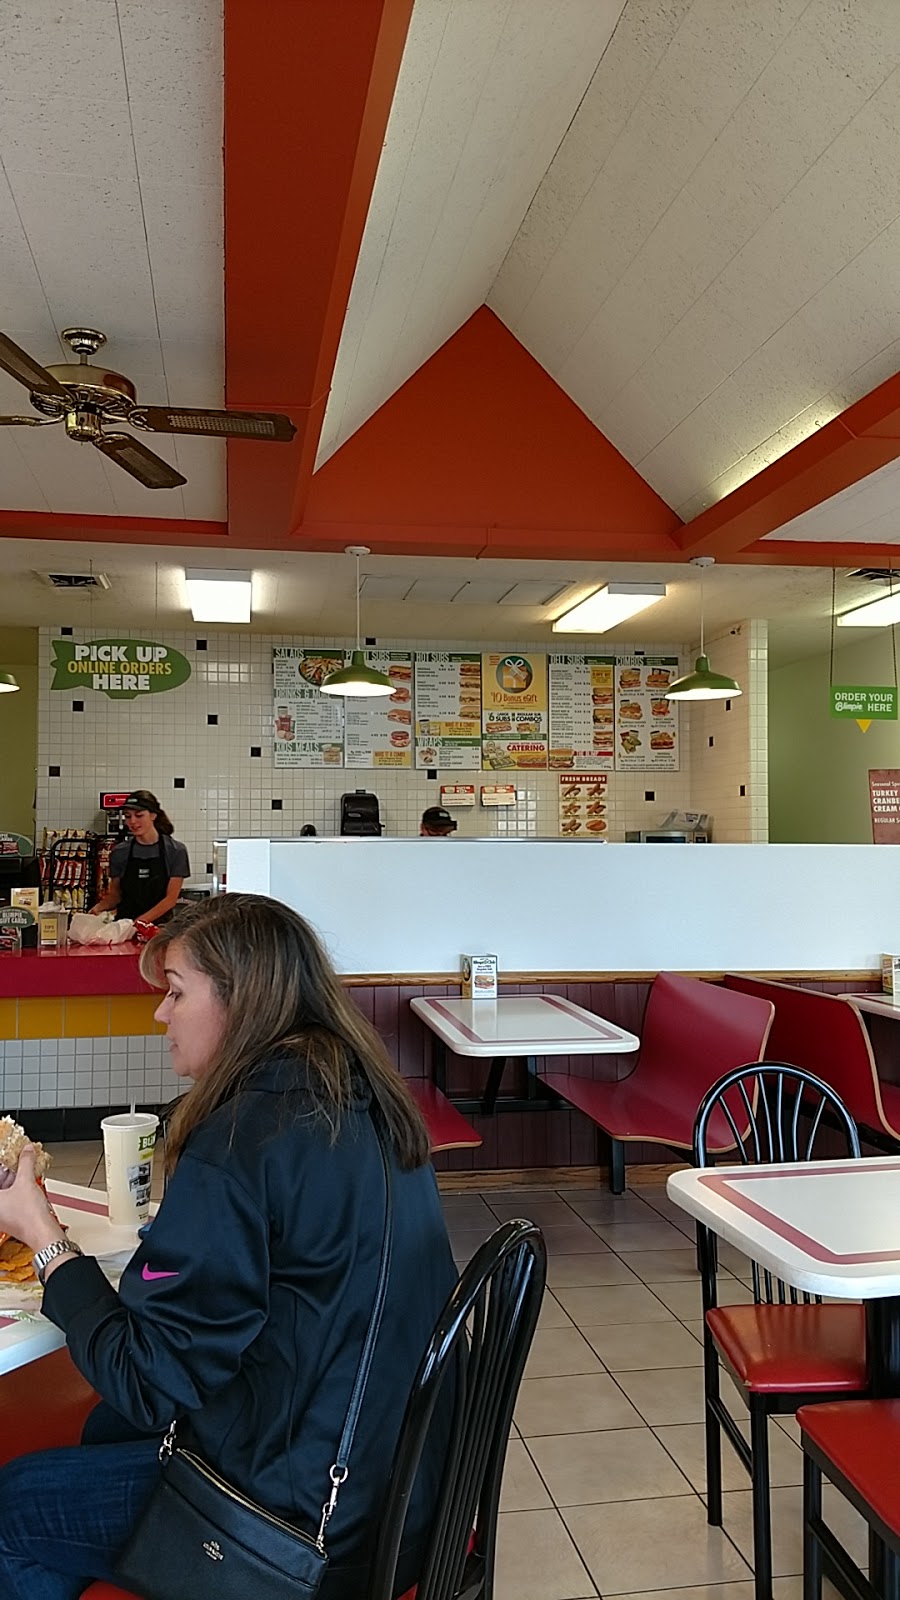 Blimpie | restaurant | 1507 12th Ave Rd, Nampa, ID 83686, USA | 2084420022 OR +1 208-442-0022